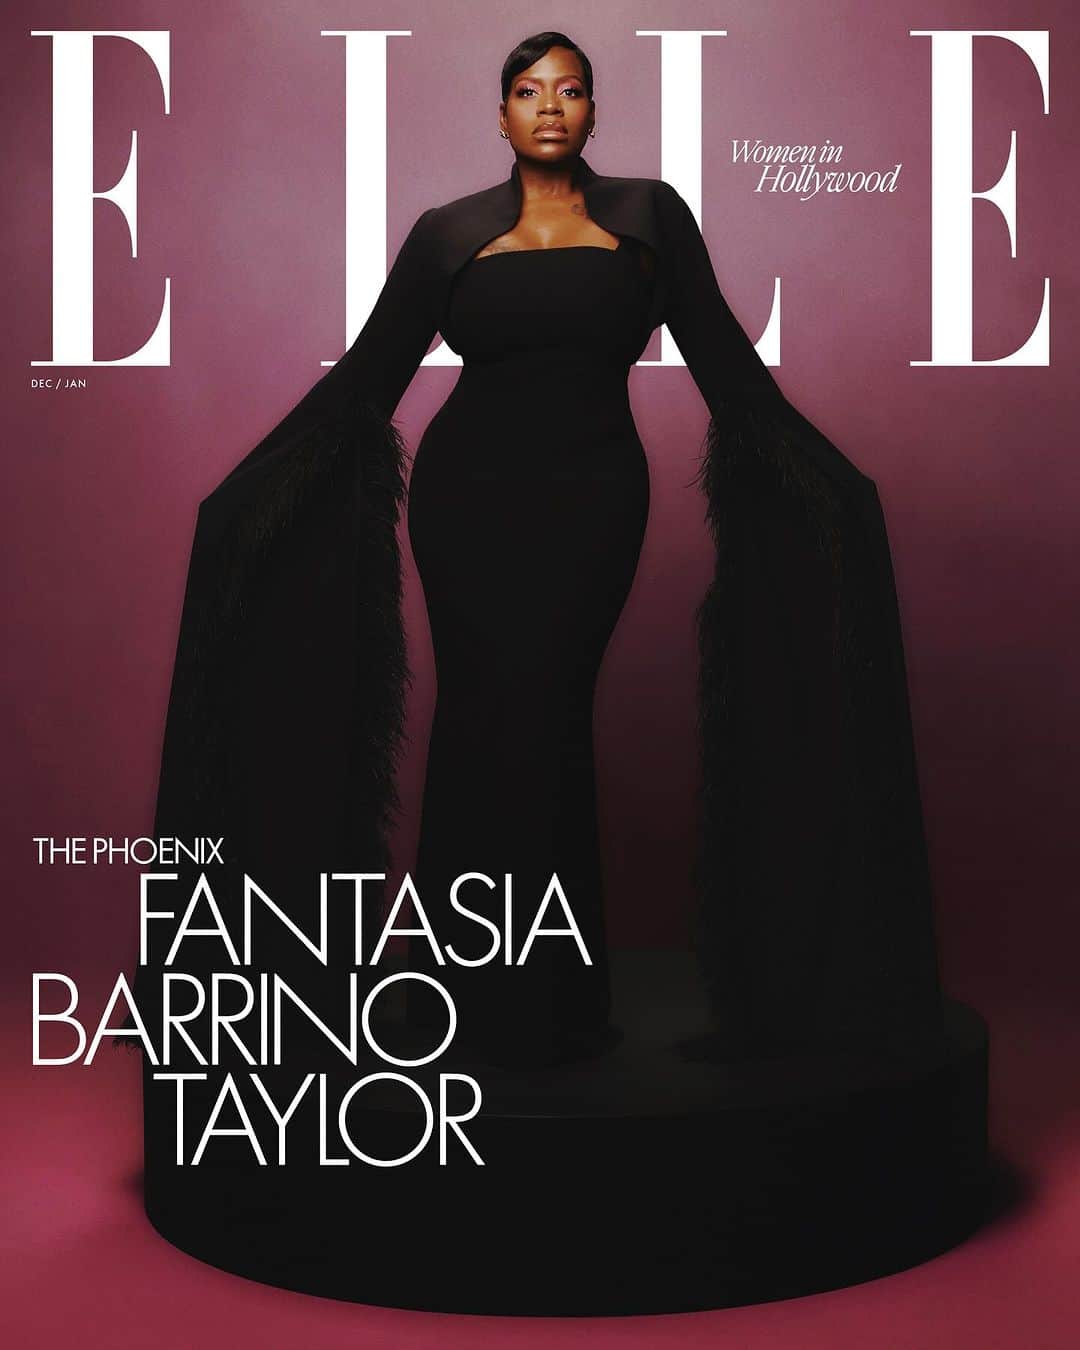 ELLE Magazineさんのインスタグラム写真 - (ELLE MagazineInstagram)「ELLE’s Women in Hollywood make up some of the best and brightest women in the industry. After 20 years of hustle, #TarajiPHenson is using her platform to help others. The Boris Lawrence Henson Foundation, named after her late father, works to destigmatize mental health care within the Black community. “I’m grateful that acting led me to a larger life purpose.” #EvaLongoria stepped into a new role as the director of her first feature film, #FlaminHot. “I couldn’t fail at my first movie—that wasn’t an option for me, because then I wouldn’t get a second chance,” she says. And #FantasiaBarrinoTaylor’s having a career resurgence, playing Celie in the new movie musical adaption of #TheColorPurple. “I’m in a better state of mind," she says. "I’m ready for Hollywood now. I was not ready for Hollywood when I was 19.”   Read more about #ELLEWIH at the link in bio.  –  Our editors worked directly with the Screen Actors Guild during its recent strike to make sure we could honor women in Hollywood while still adhering to union guidelines.  ELLE: @elleusa Editor-in-Chief: Nina Garcia @ninagarcia Talent: Taraji P. Henson, Eva Longoria, Fantasia Barrino Taylor @tarajiphenson @evalongoria @tasiasword Photographer: Adrienne Raquel, Zoey Grossman @adrienneraquel @zoeygrossman Stylist: Zerina Akers @zerinaakers and Wayman + Micah, Alex White, @waymanandmicah @alexwhiteedits Writer: Juliana Ukiomogbe, Adrienne Gaffney, Danielle James @juliana_uki @theislandiva Hair: Tym Wallace at Mastermind MGMT, Teddy Charles at Nevermind Agency, Nikki Nelms for SheaMoisture @tymwallacehair @mastermind_mgmt @teddycharles35 @nikkinelms @sheamoisture Makeup: Saisha Beecham at Artists Management Co LA, Pati Dubroff for Forward Artists, Rokael at Rokael Beauty @saishabeecham @artistmanagementmiami @patidubroff @forwardartists @rokaelbeauty Manicure: Temeka Jackson at A-Frame Agency, Ashlie Johnson at The Wall Group, @customtnails1 @aframe_agency @ashlie_johnson @thewallgroup Production: Anthony Federici at Petty Cash Production, Lola Production @thesaintsalome @petty_cash_production @lolaproduction Set design: Bryan Porter at Owl and the Elephant Set: Kelly Infield @kellys_phone」11月30日 22時00分 - elleusa